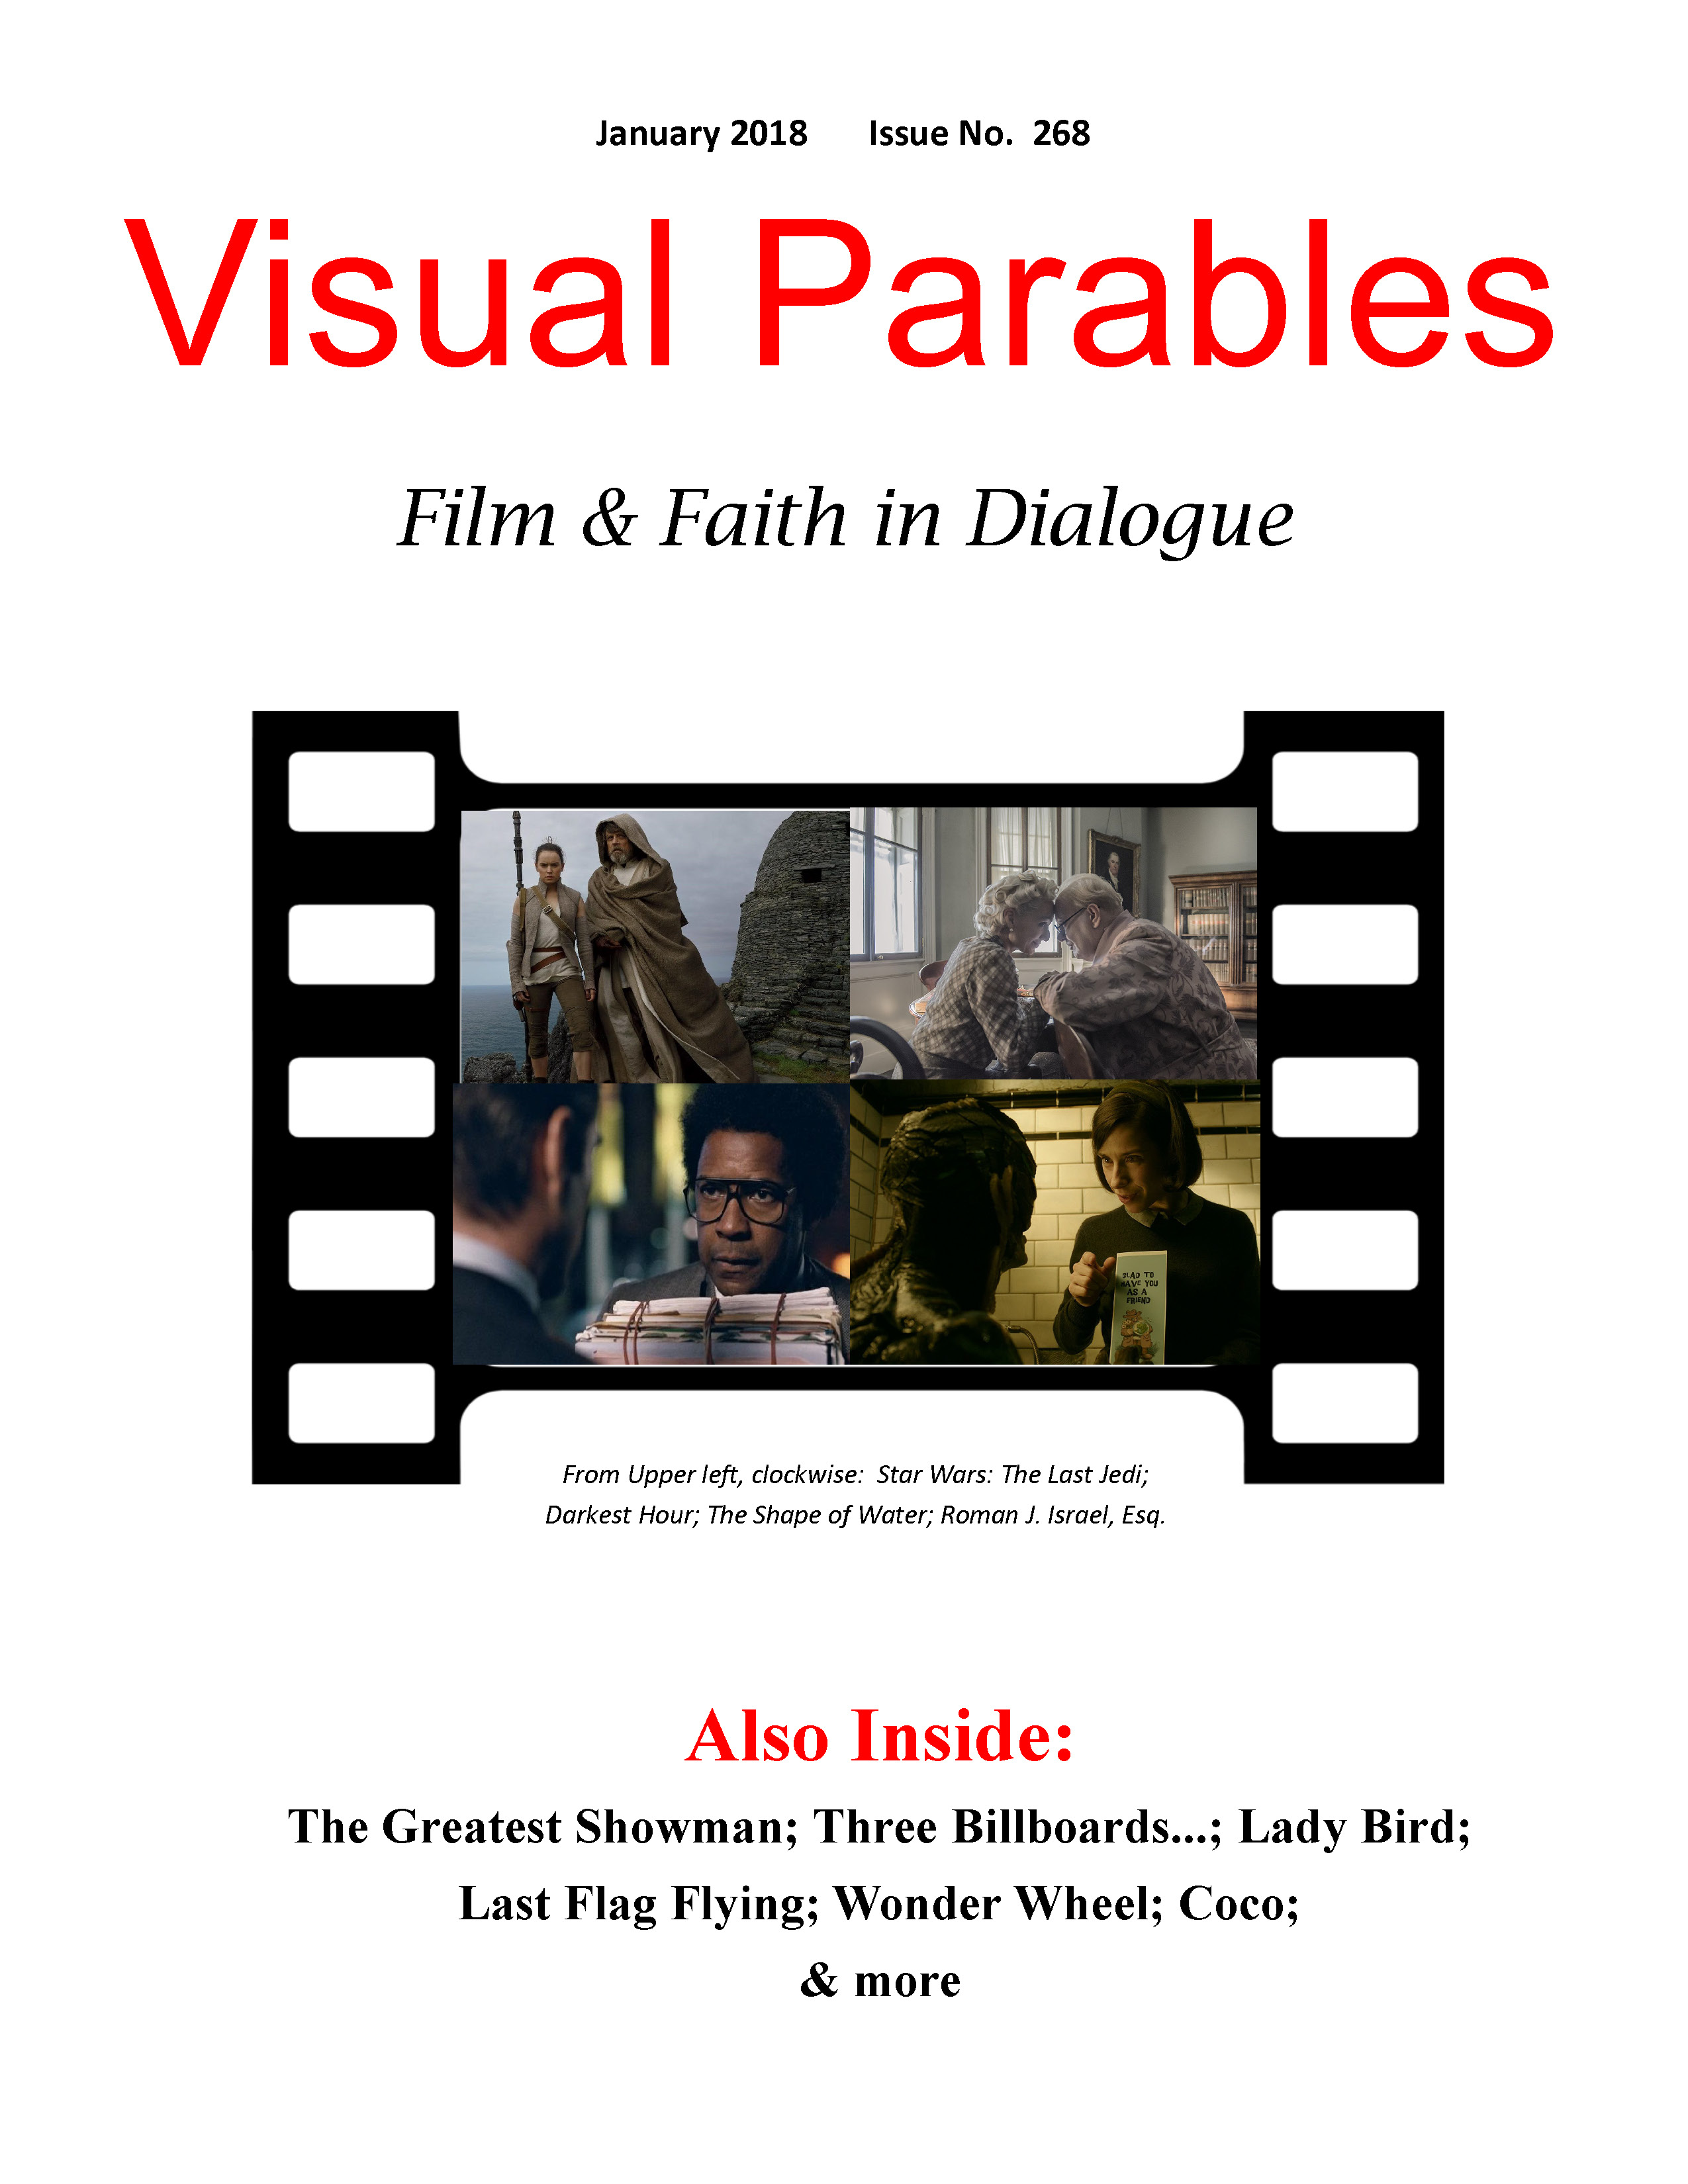 January 2018 issue of Visual Parables